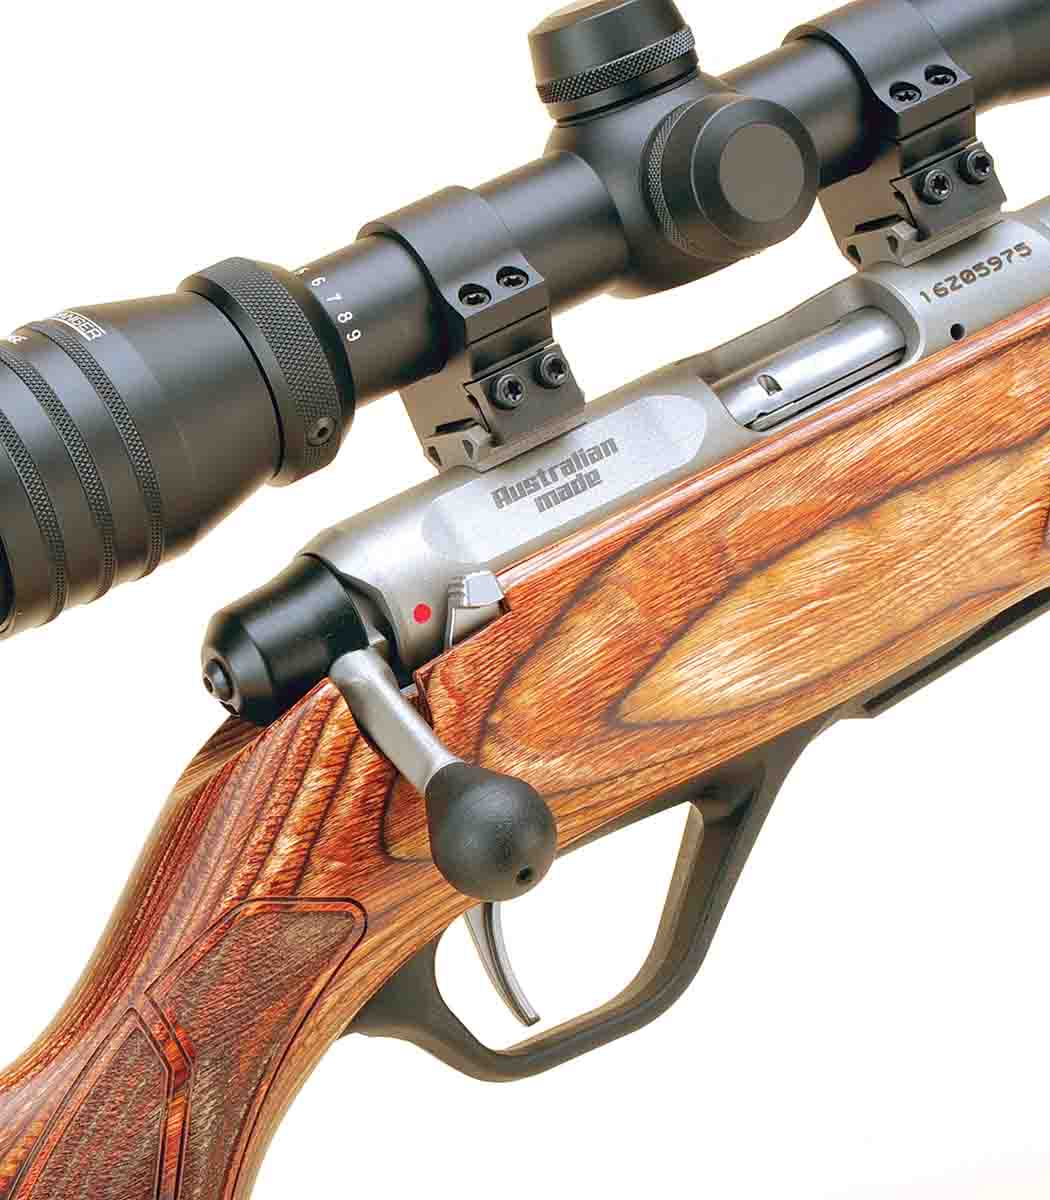 The two-position safety is located right in front of the bolt handle. The .17 HMR and the .22 WMR versions have a “dimple” on the knob indicating the rifle is for a magnum cartridge.